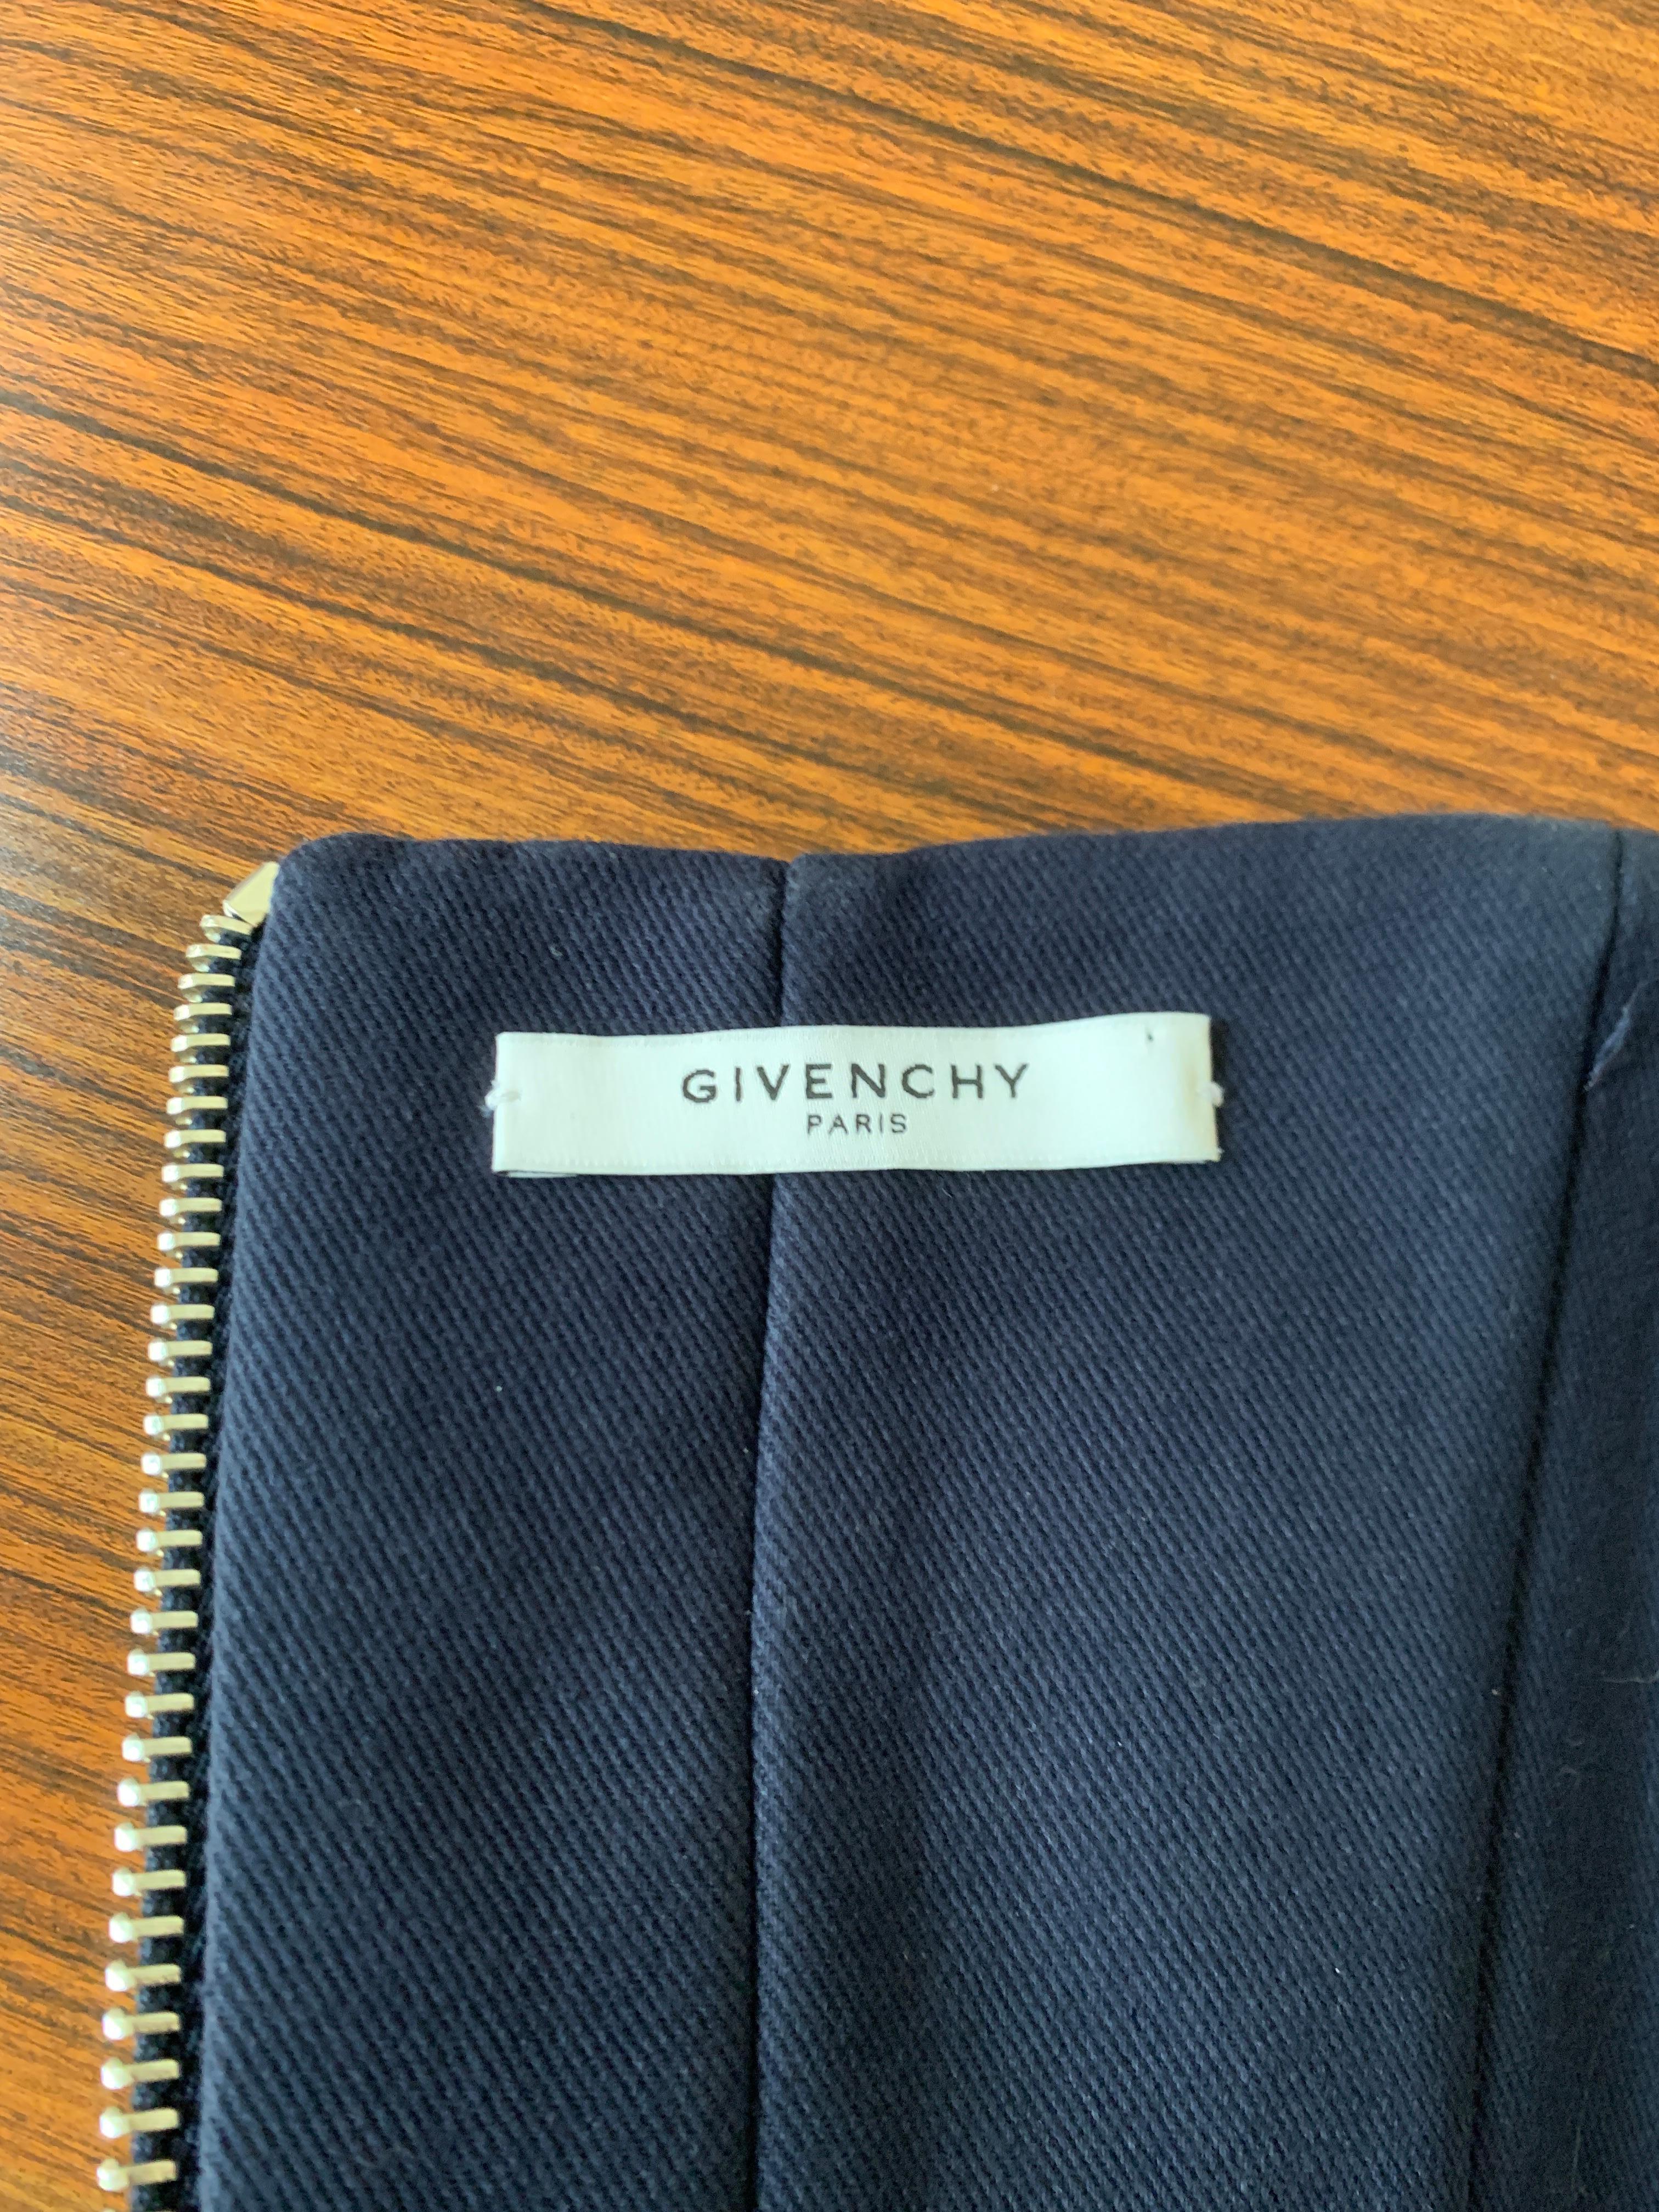 Givenchy Dark Denim Bustier Corset Strapless Top Stitch and Zipper Detail In Good Condition In San Francisco, CA